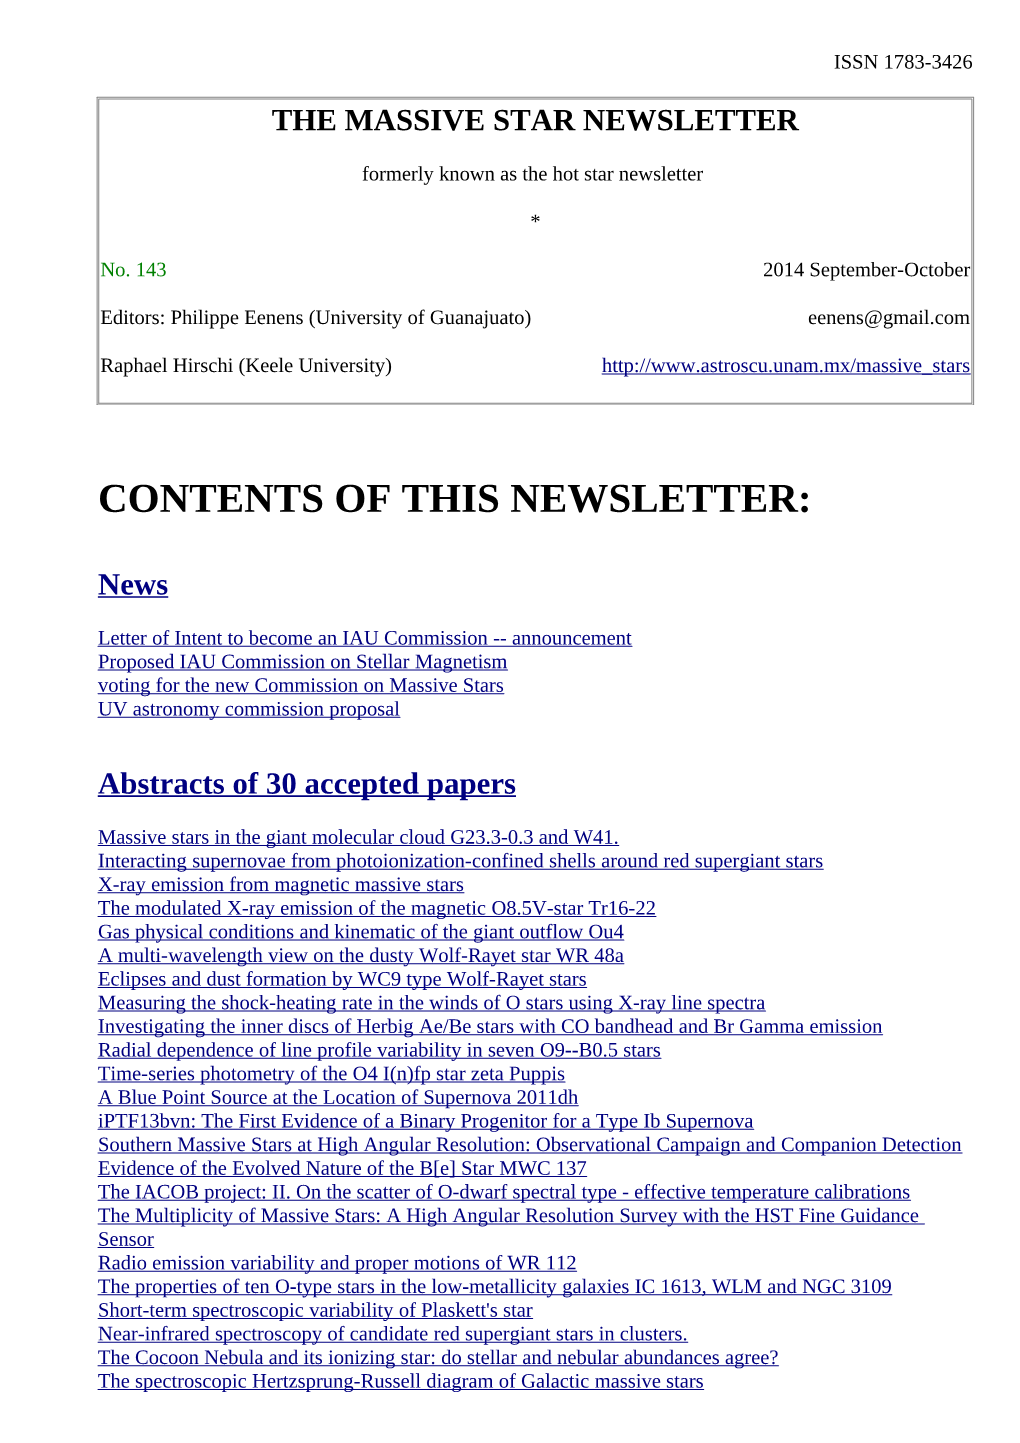 Newsletter 143 of Working Group on Massive Star